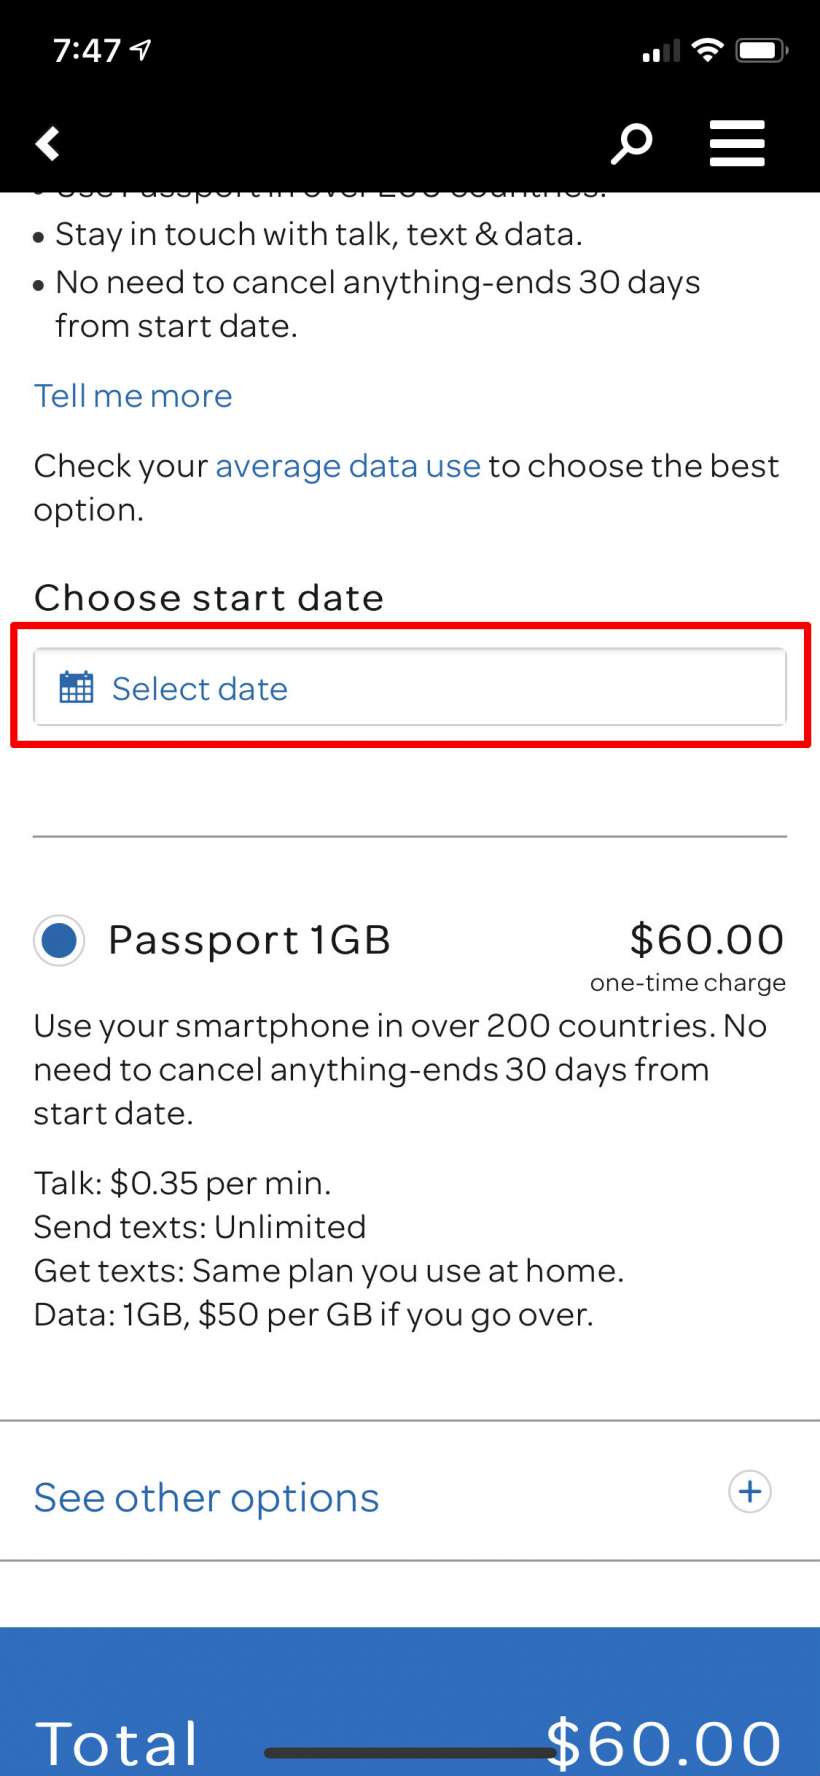 How to enable AT&T Passport for international travel on iPhone.